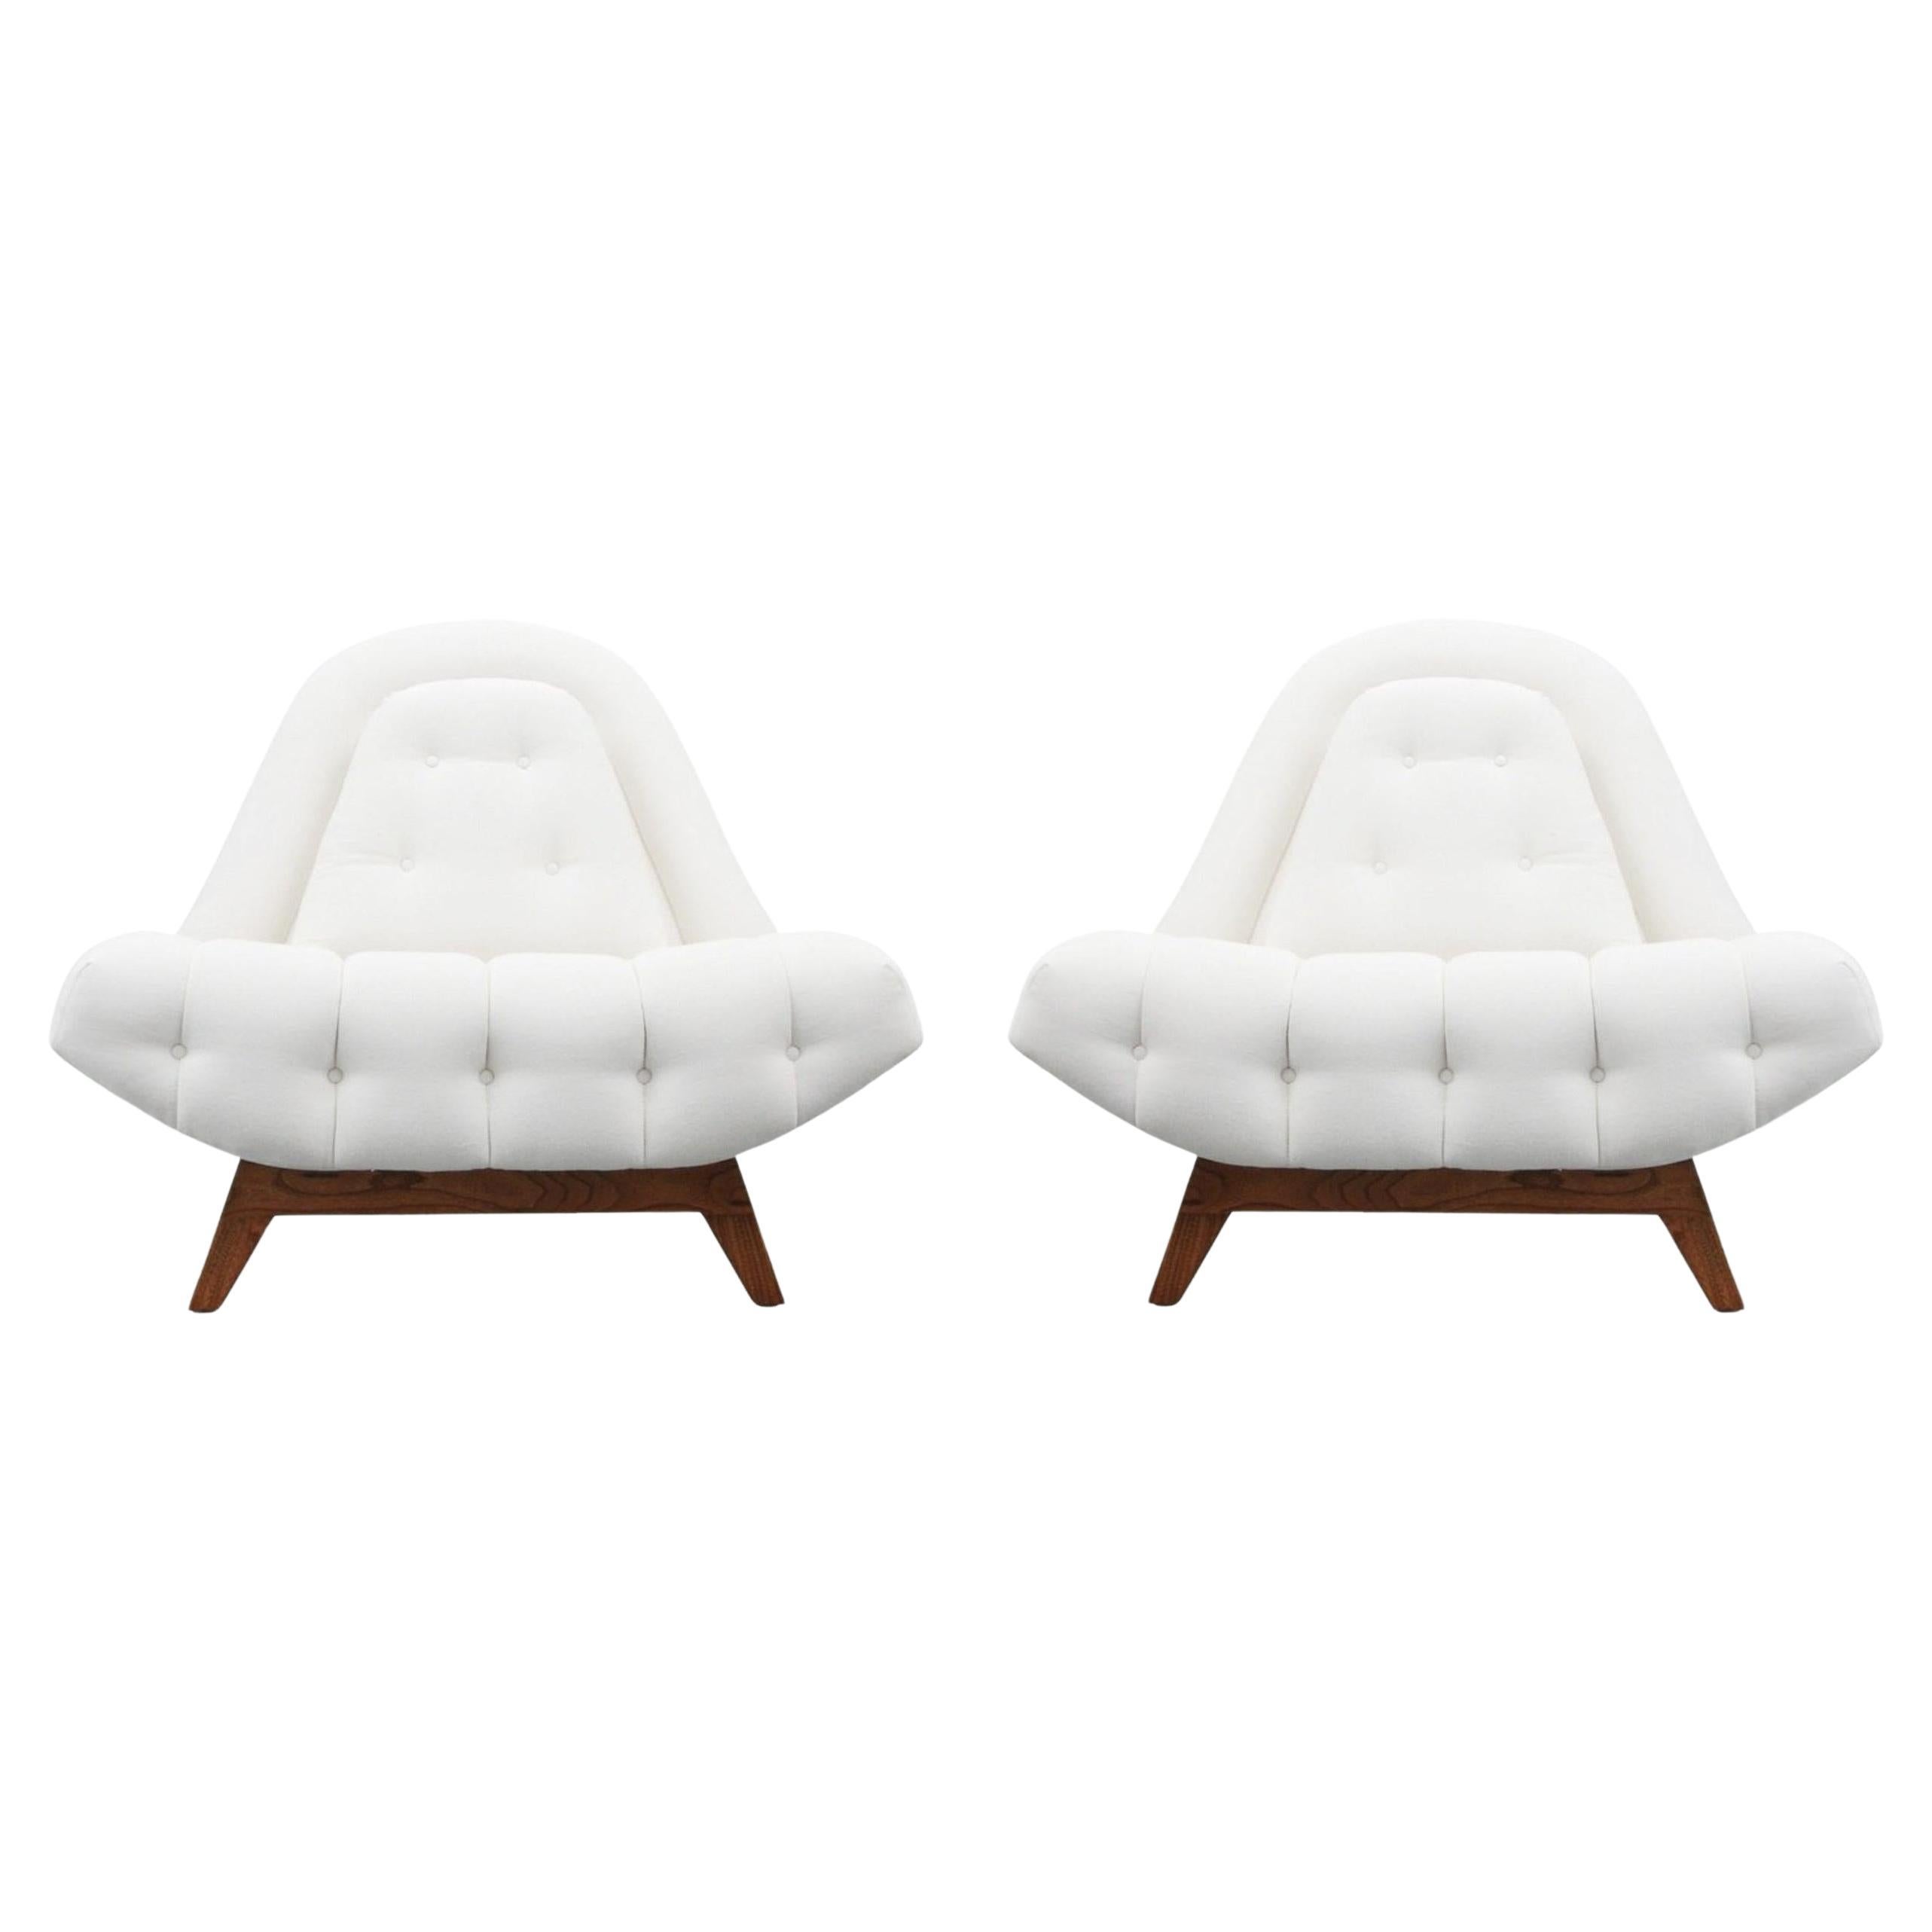 Adrian Pearsall 'Gondola' Button-Tufted Chairs for Craft Associates